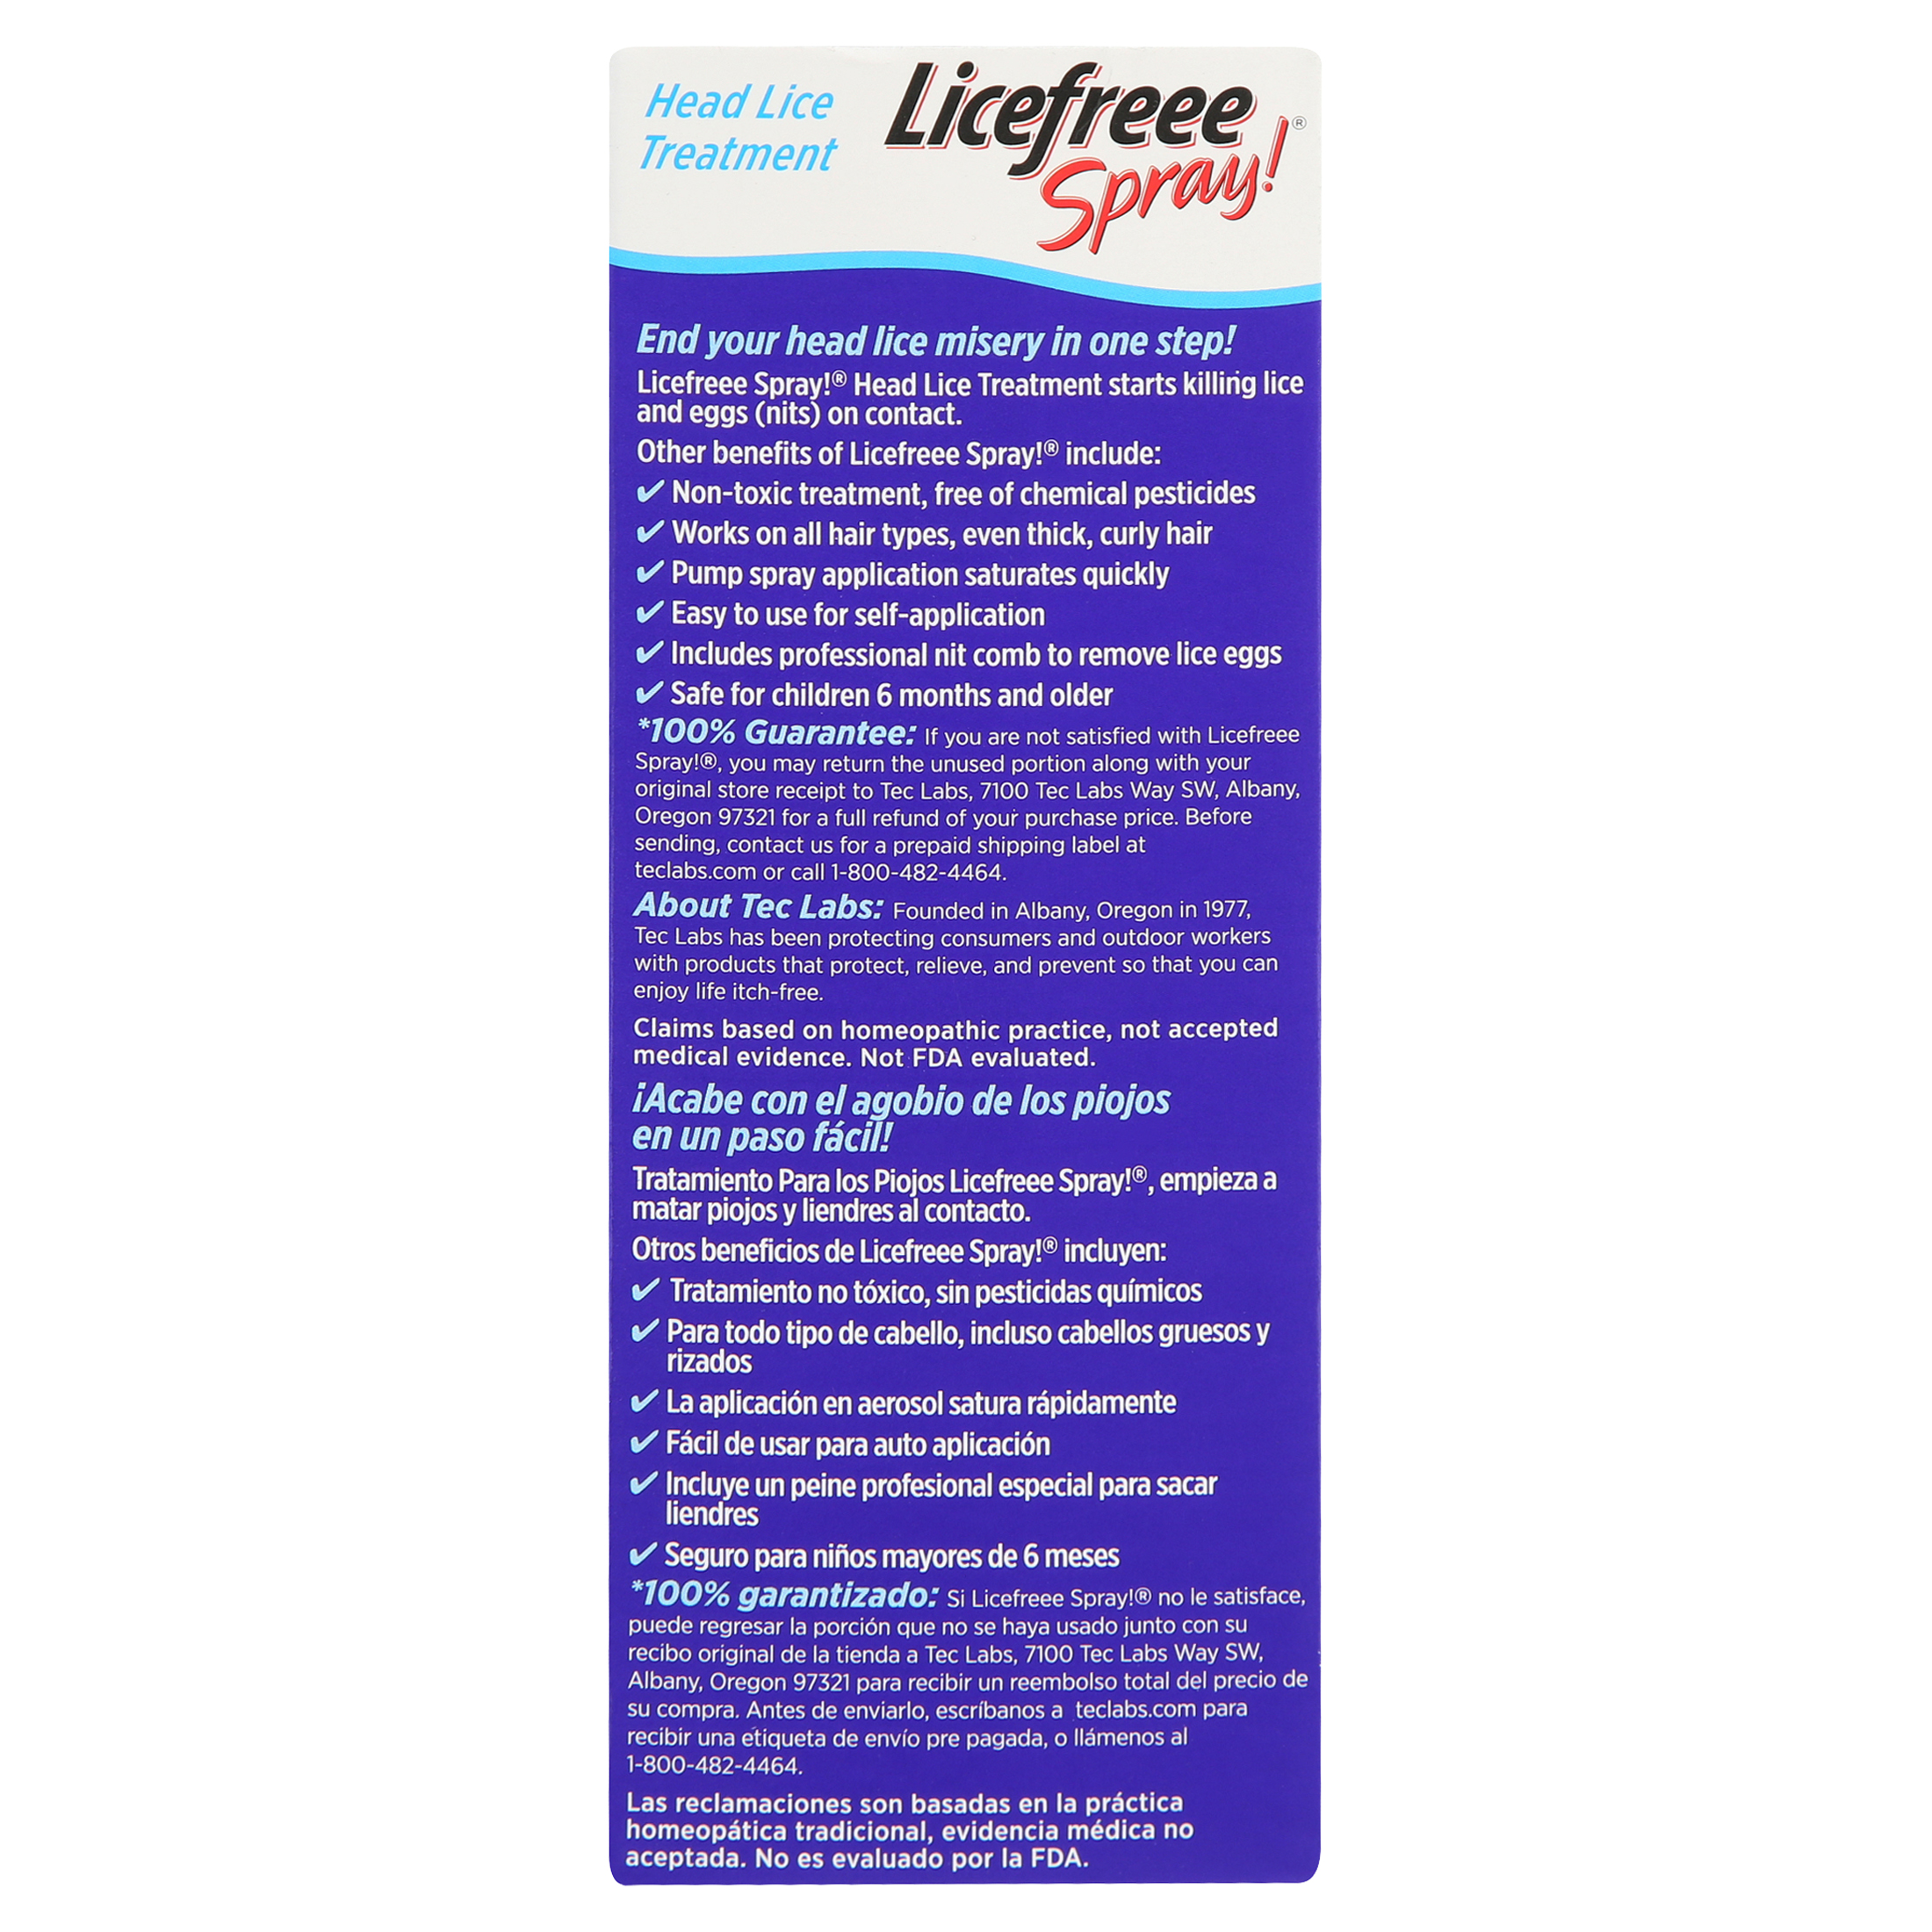 Licefreee Spray! Instant Head Lice Treatment, 6.0 fl oz - image 5 of 18